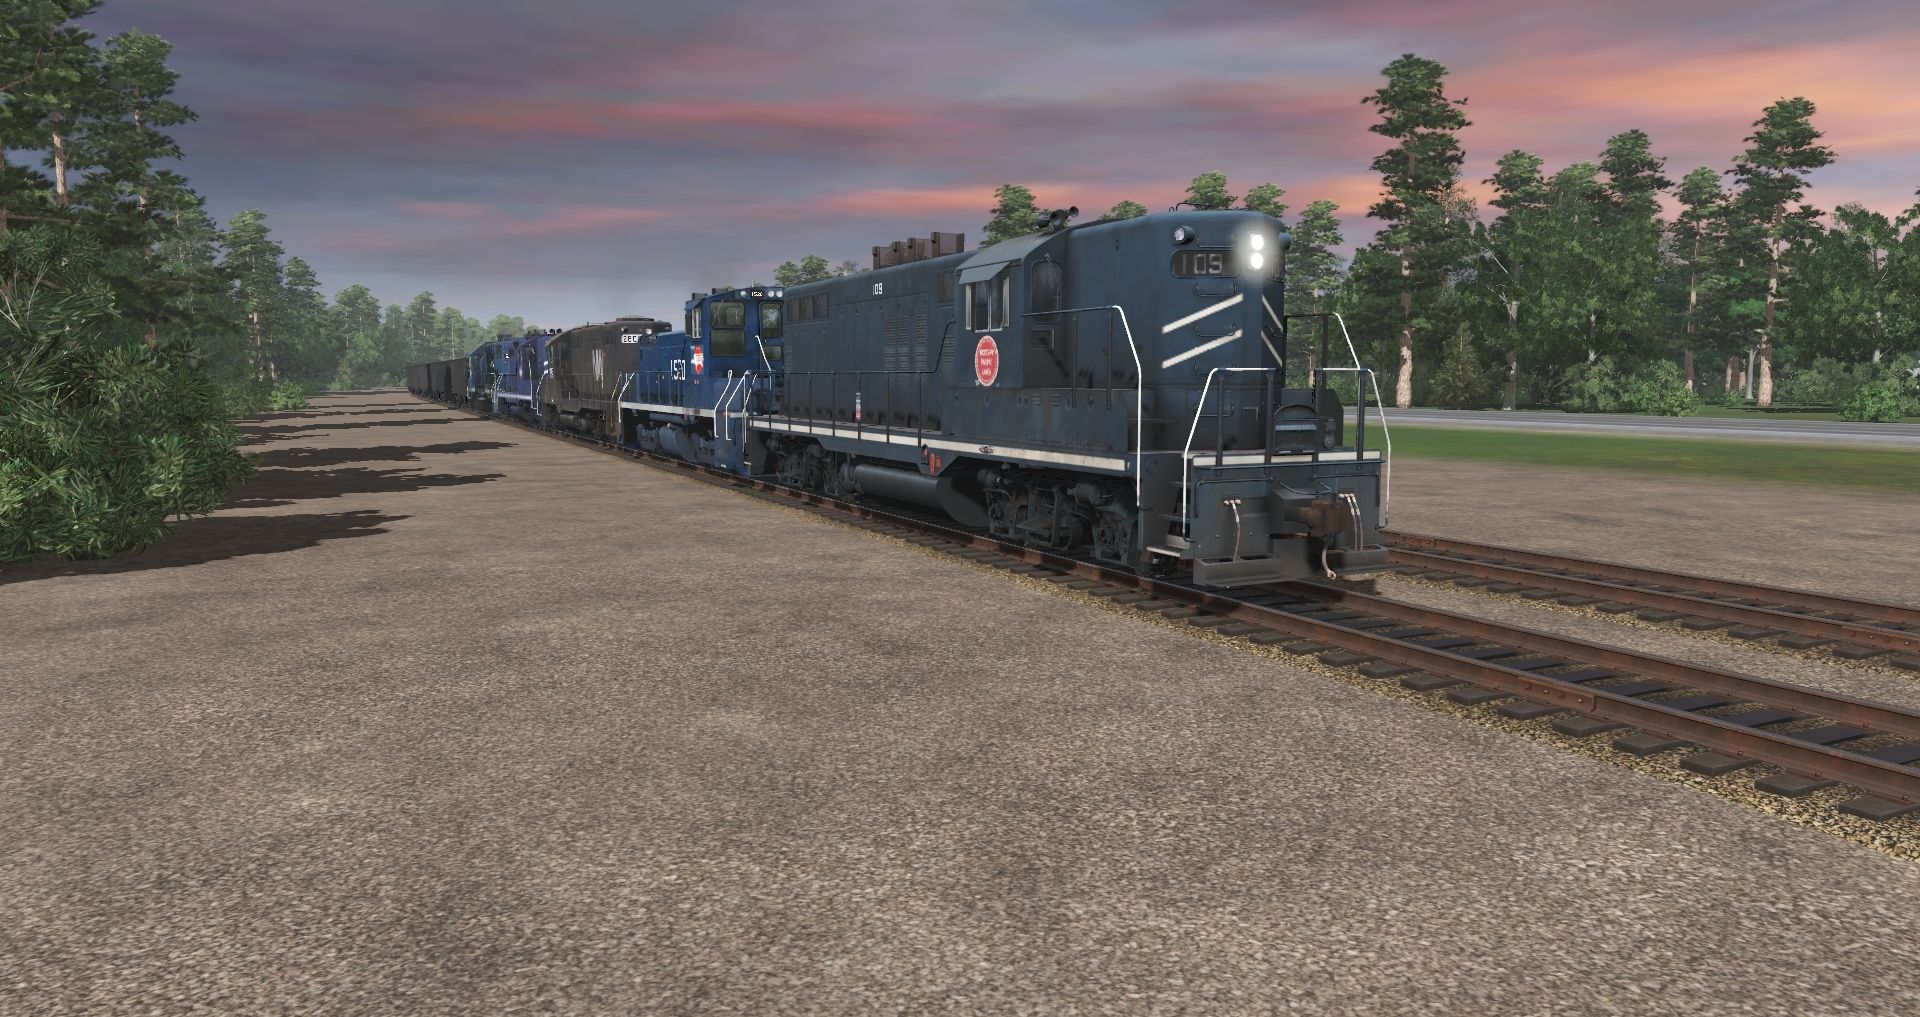 MP-105-awaits-its-turn-to-enter-the-yard-on-the-Columbia-Switching-route..jpg